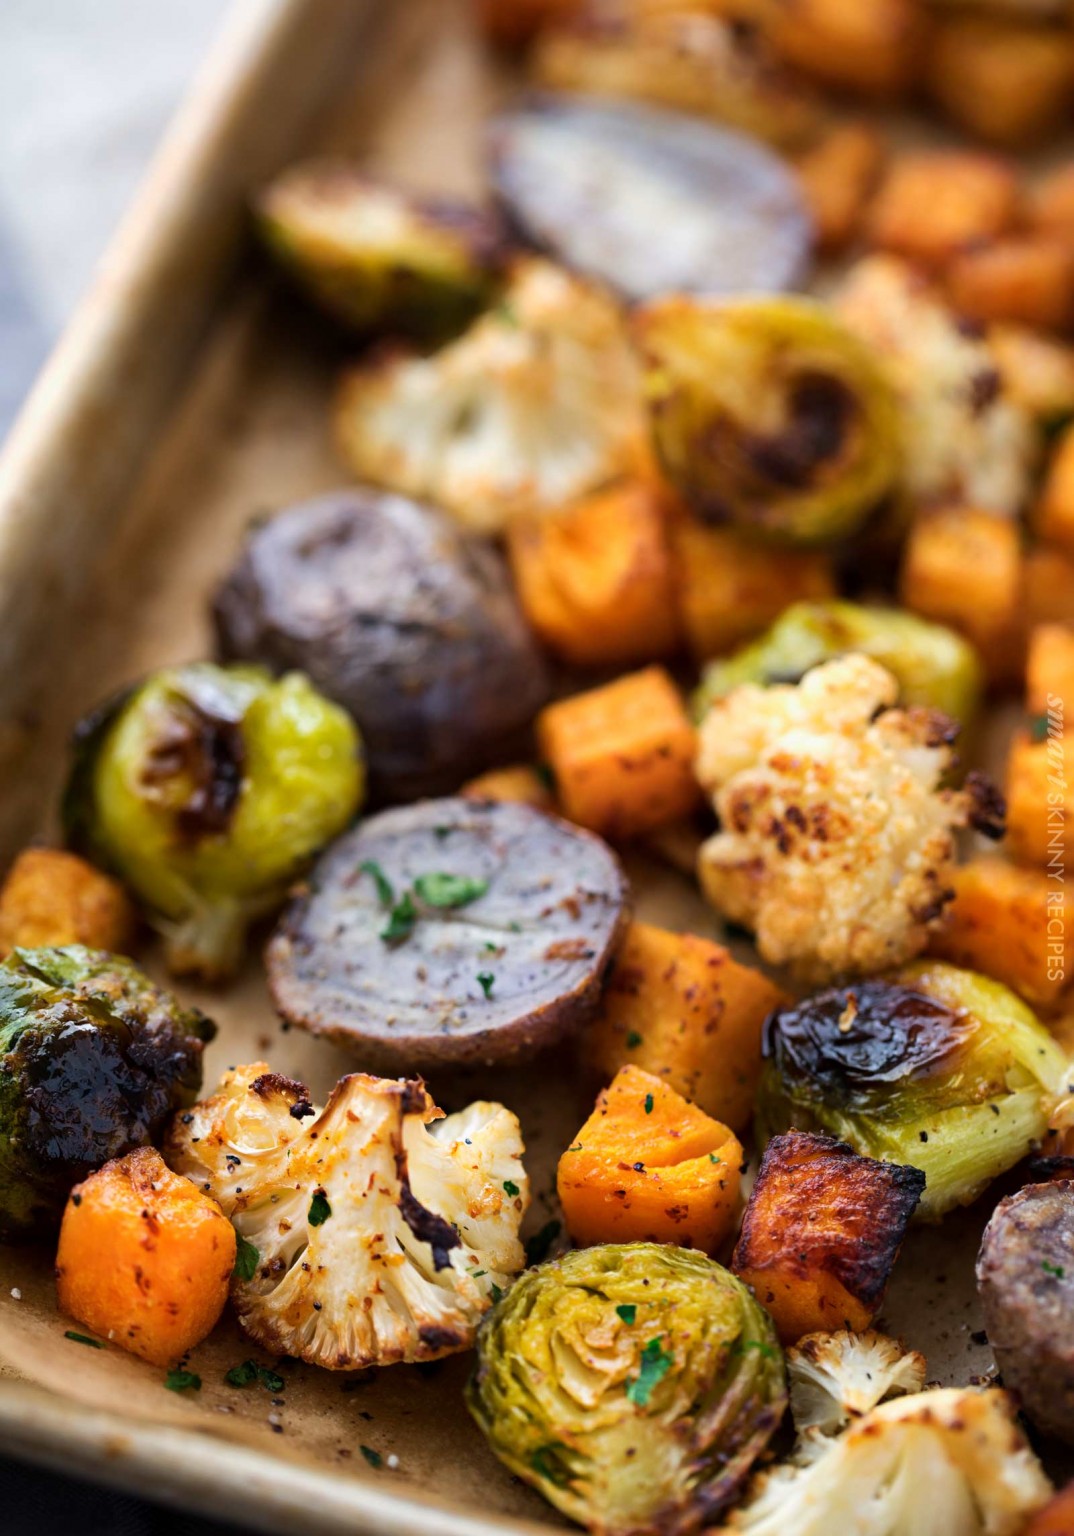 Sheet Pan Oven Roasted Vegetables The Chunky Chef